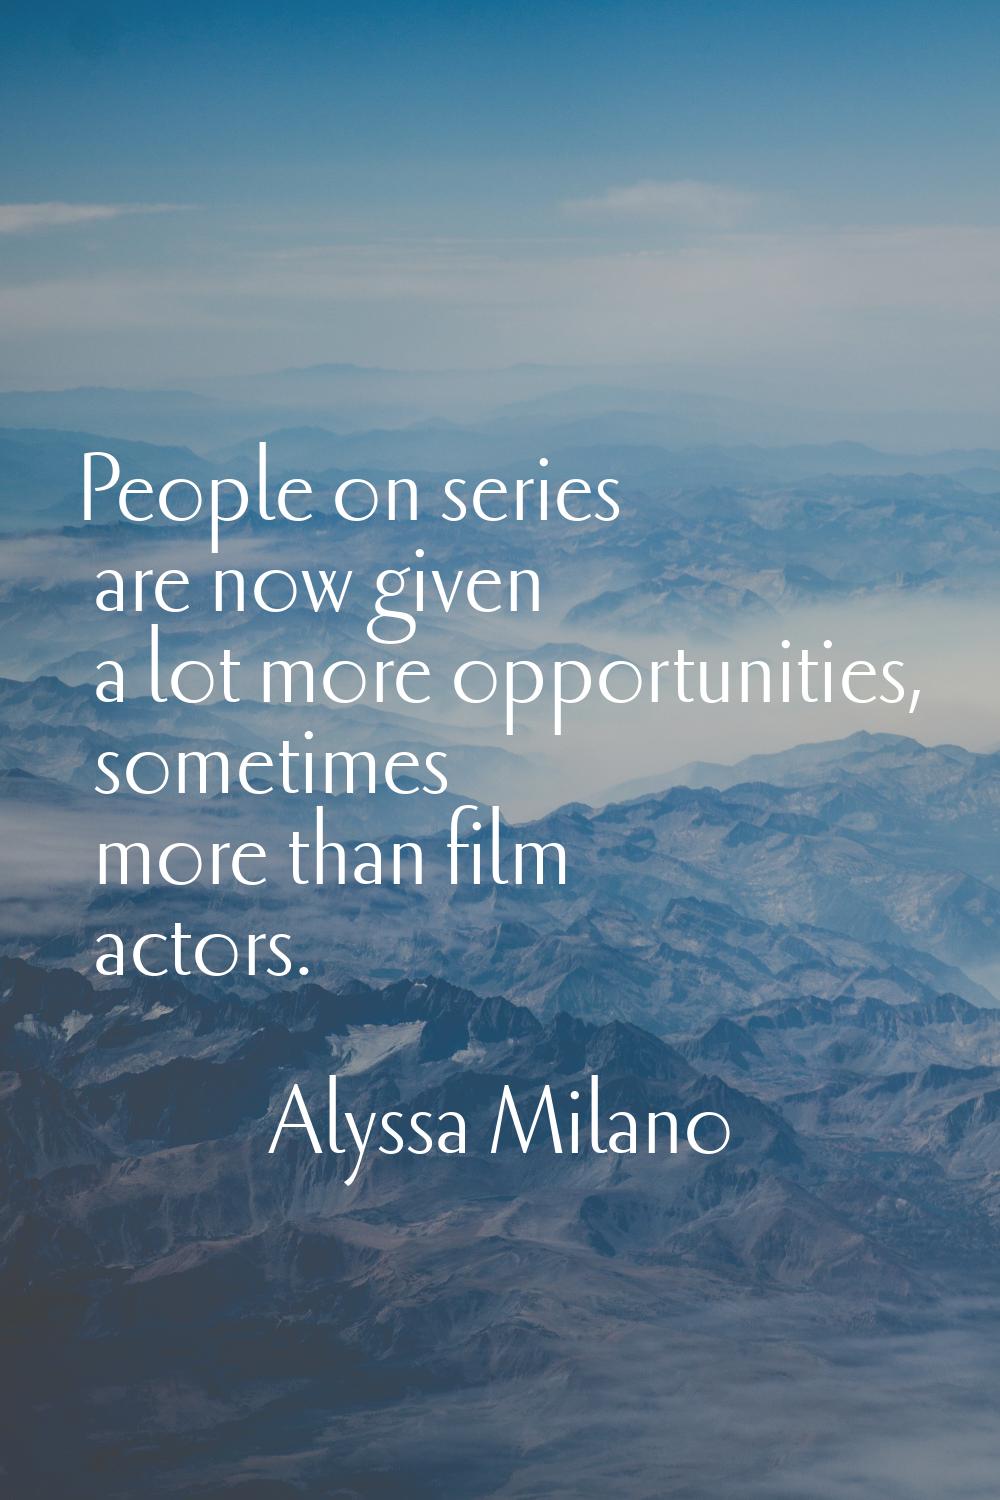 People on series are now given a lot more opportunities, sometimes more than film actors.